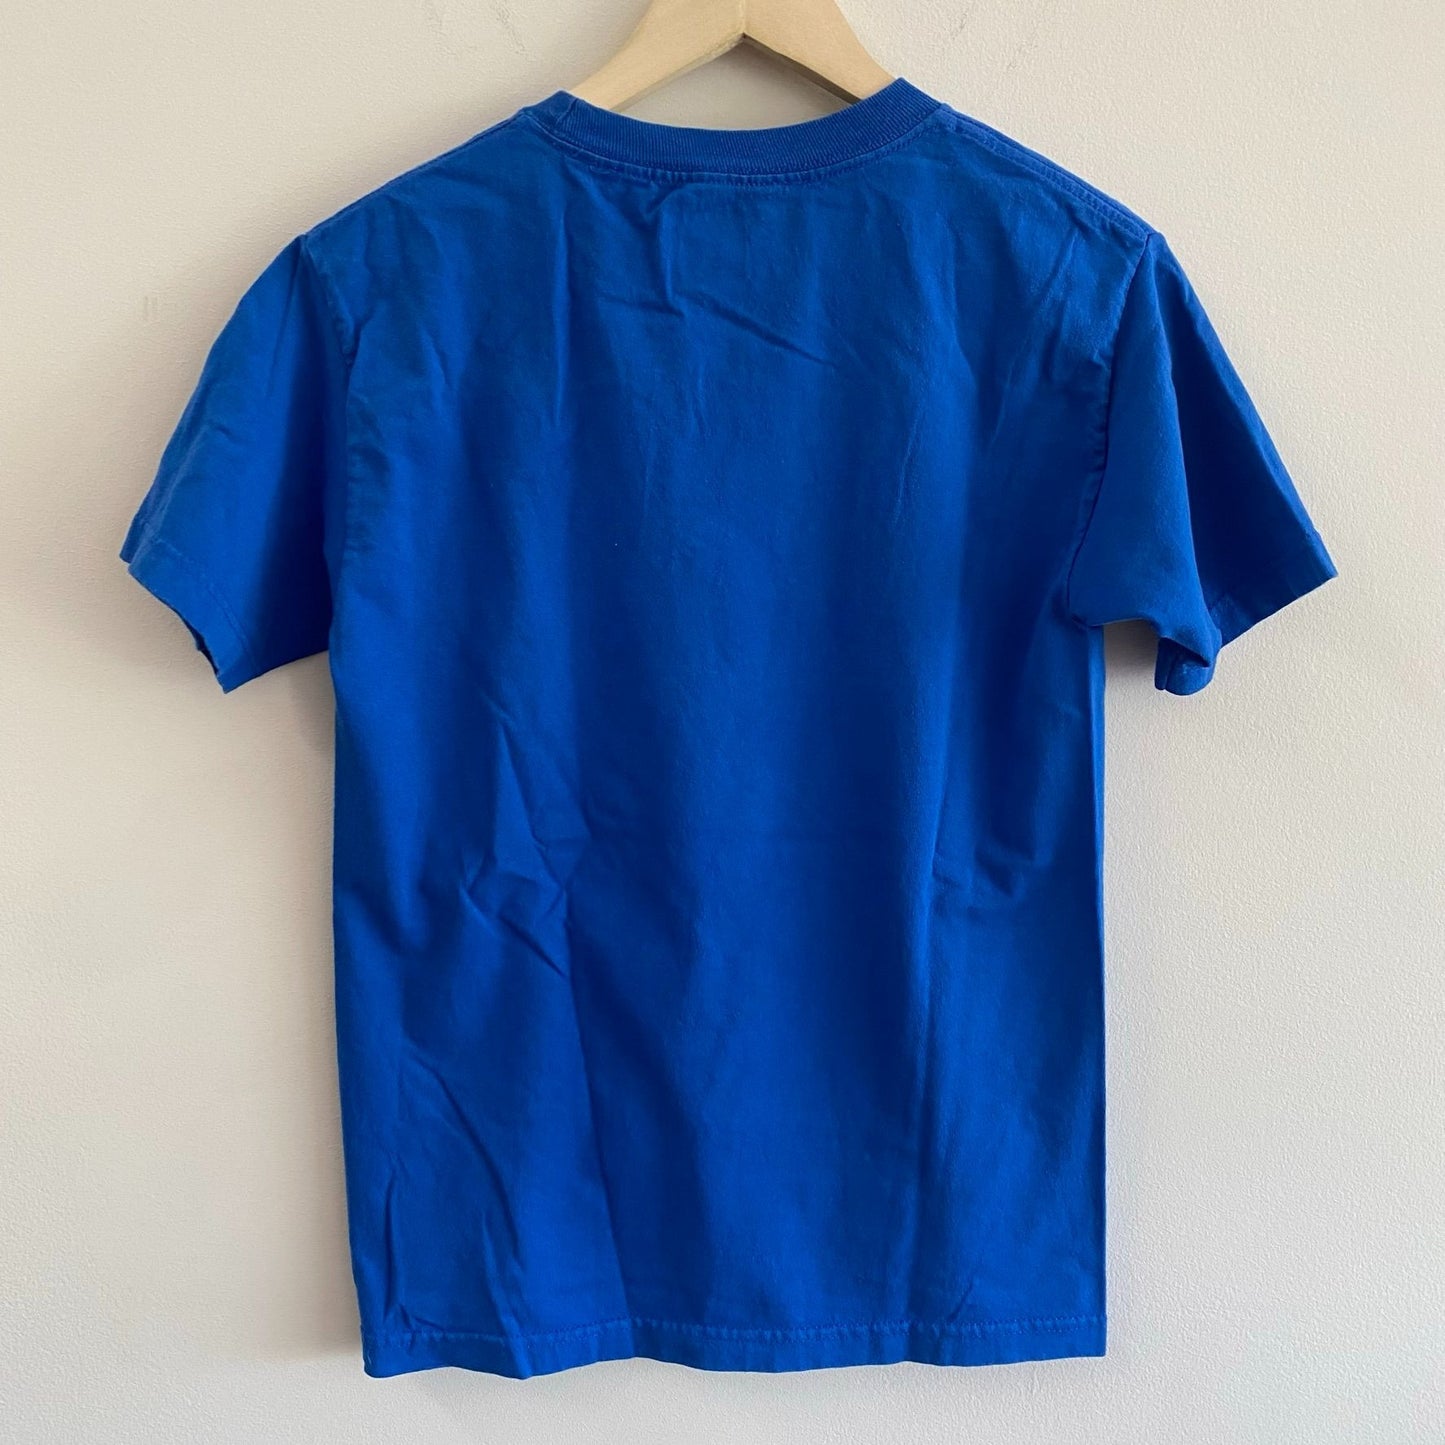 Nike Blue Graphic S/S Tee